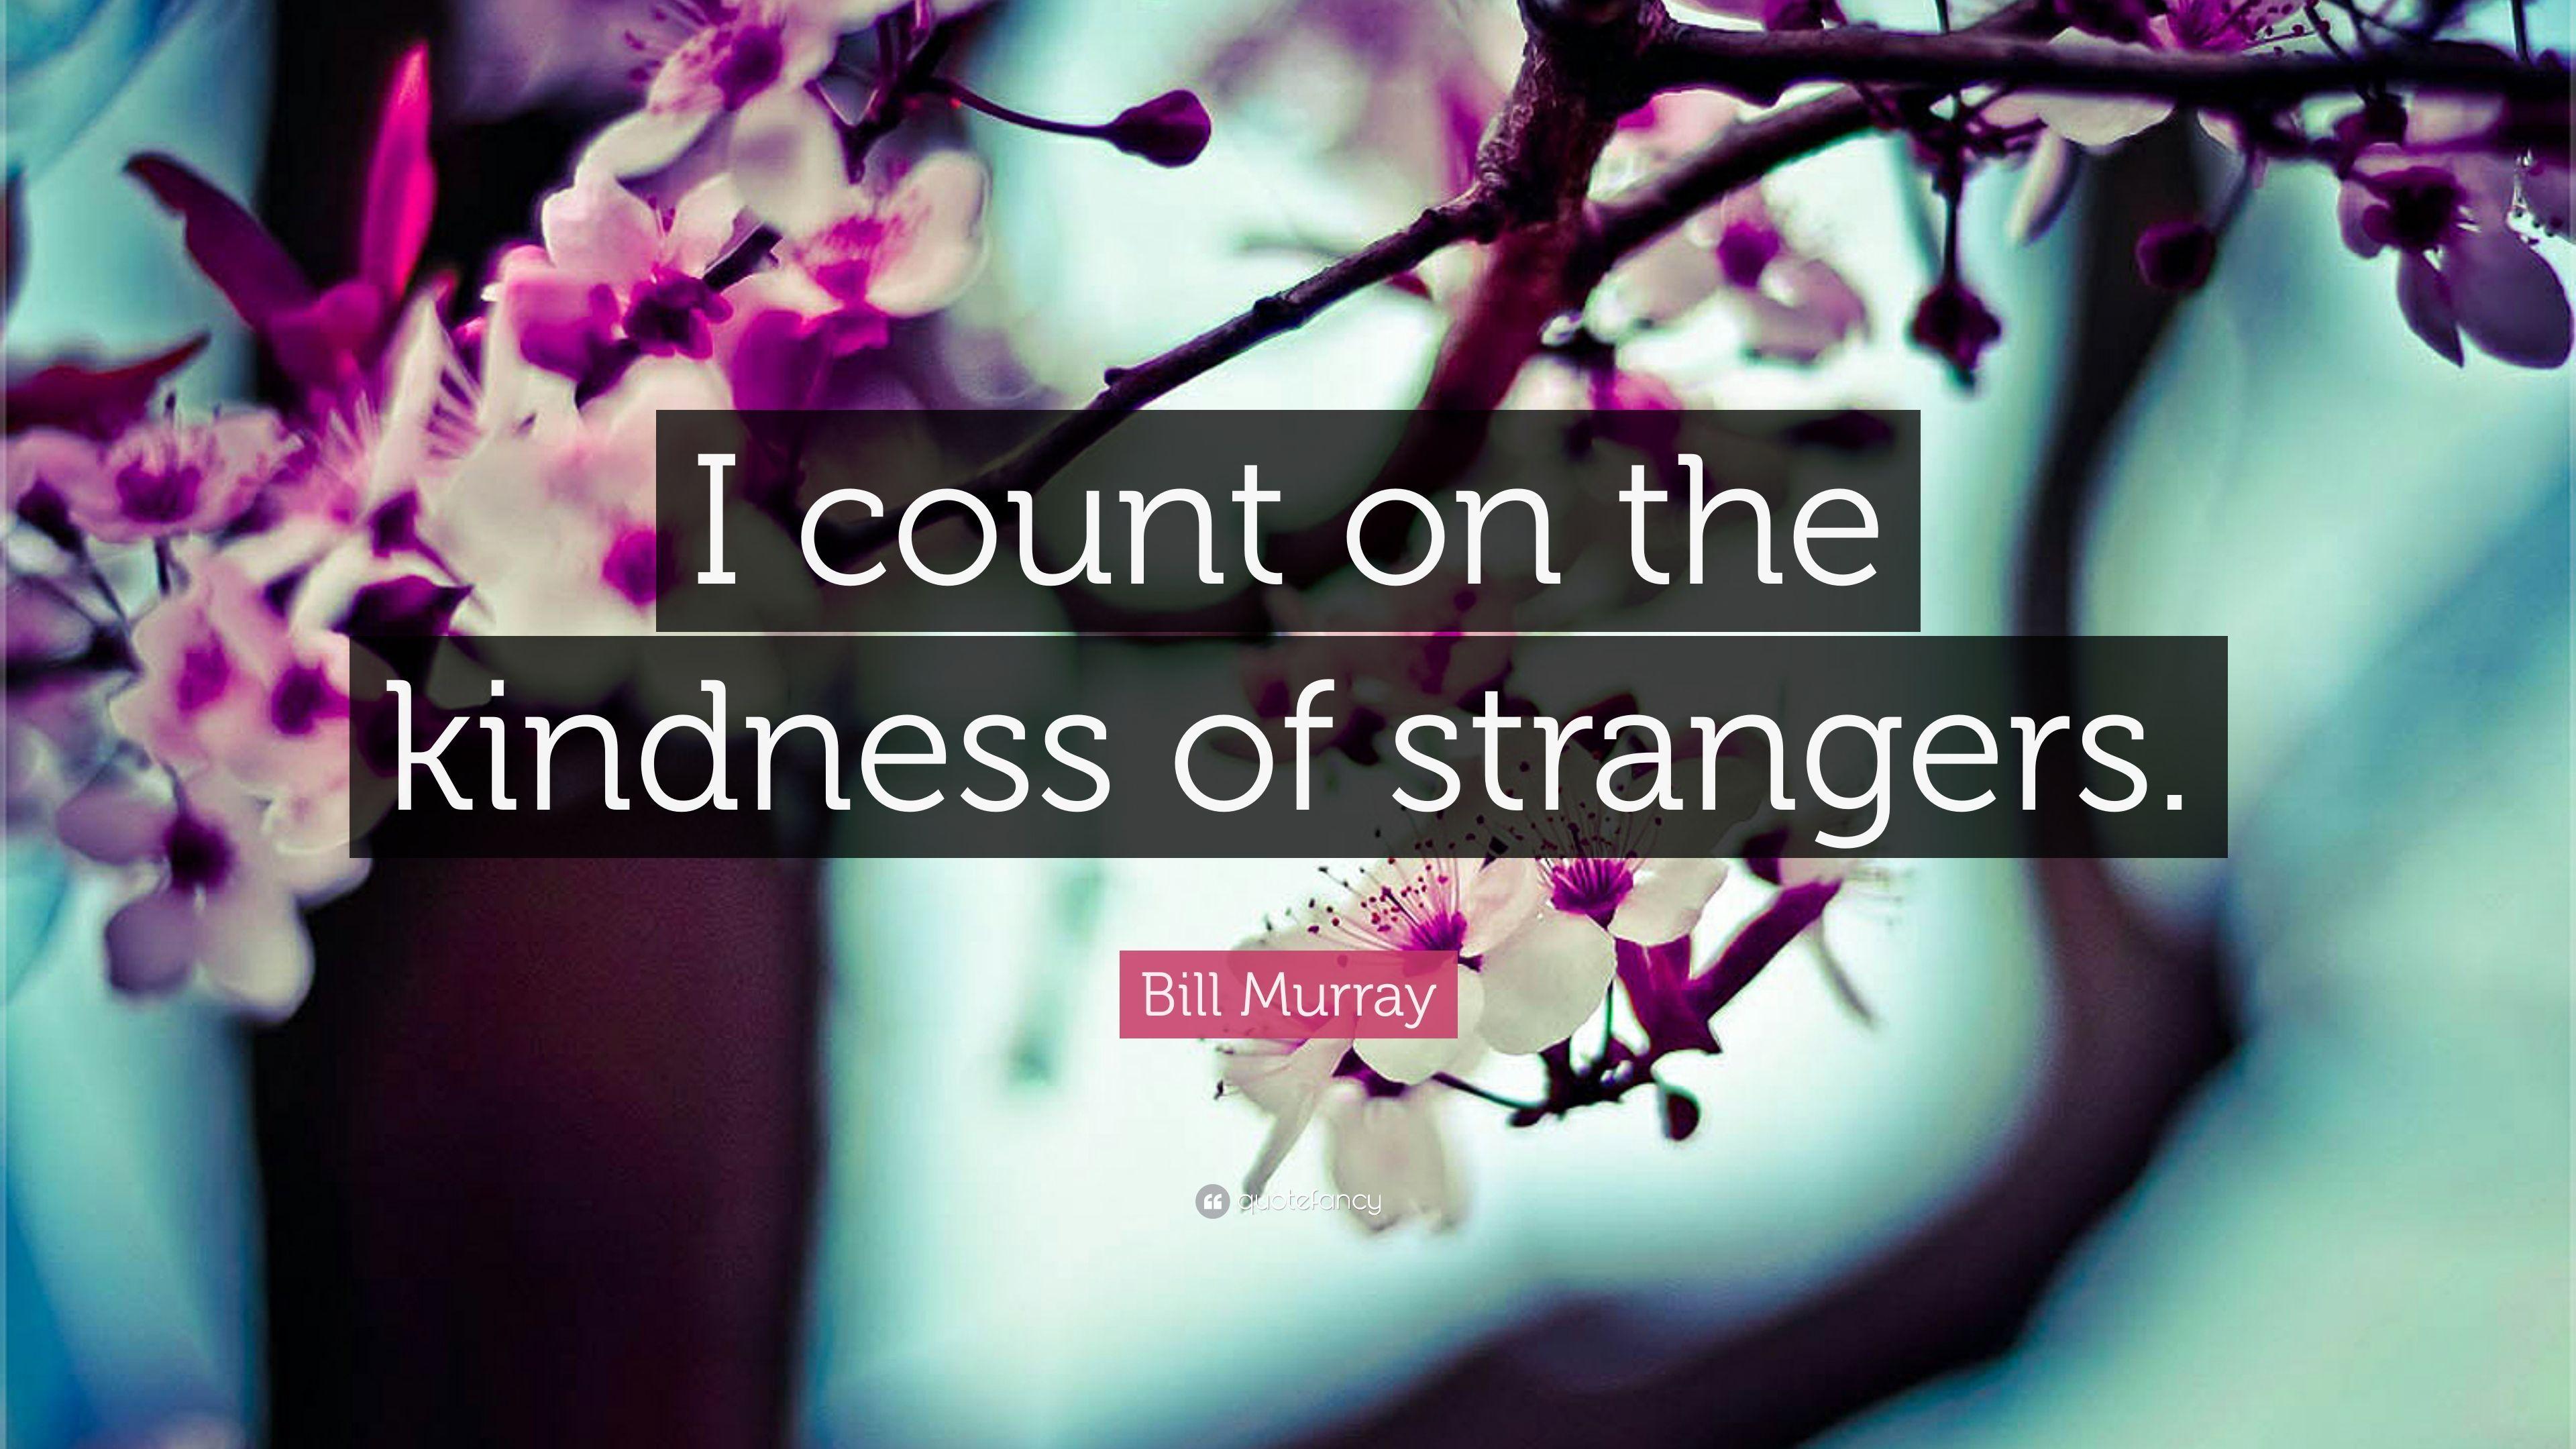 Bill Murray Quote: “I count on the kindness of strangers.” 7